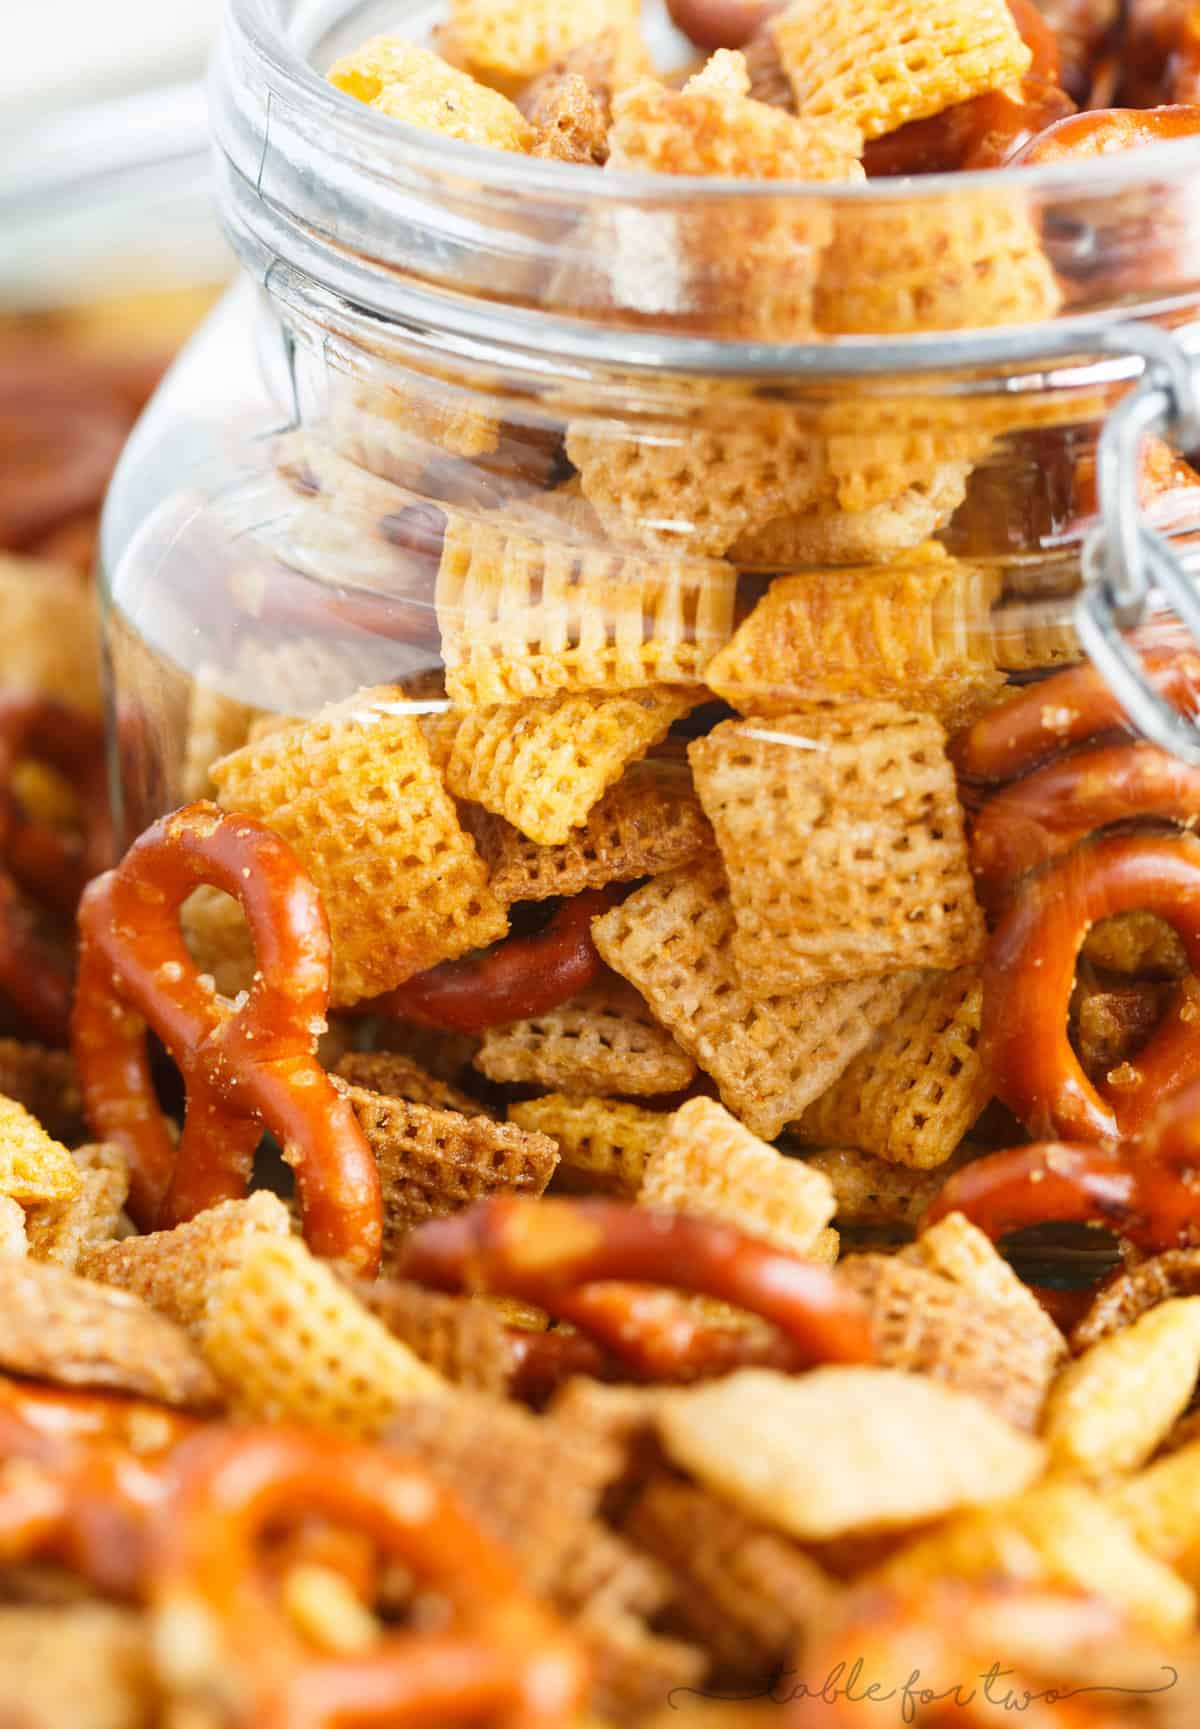 Chex mix made at home is great year round especially when you have the craving for a snack! It's so much better than store-bought because YOU control what ingredients go into your chex mix!